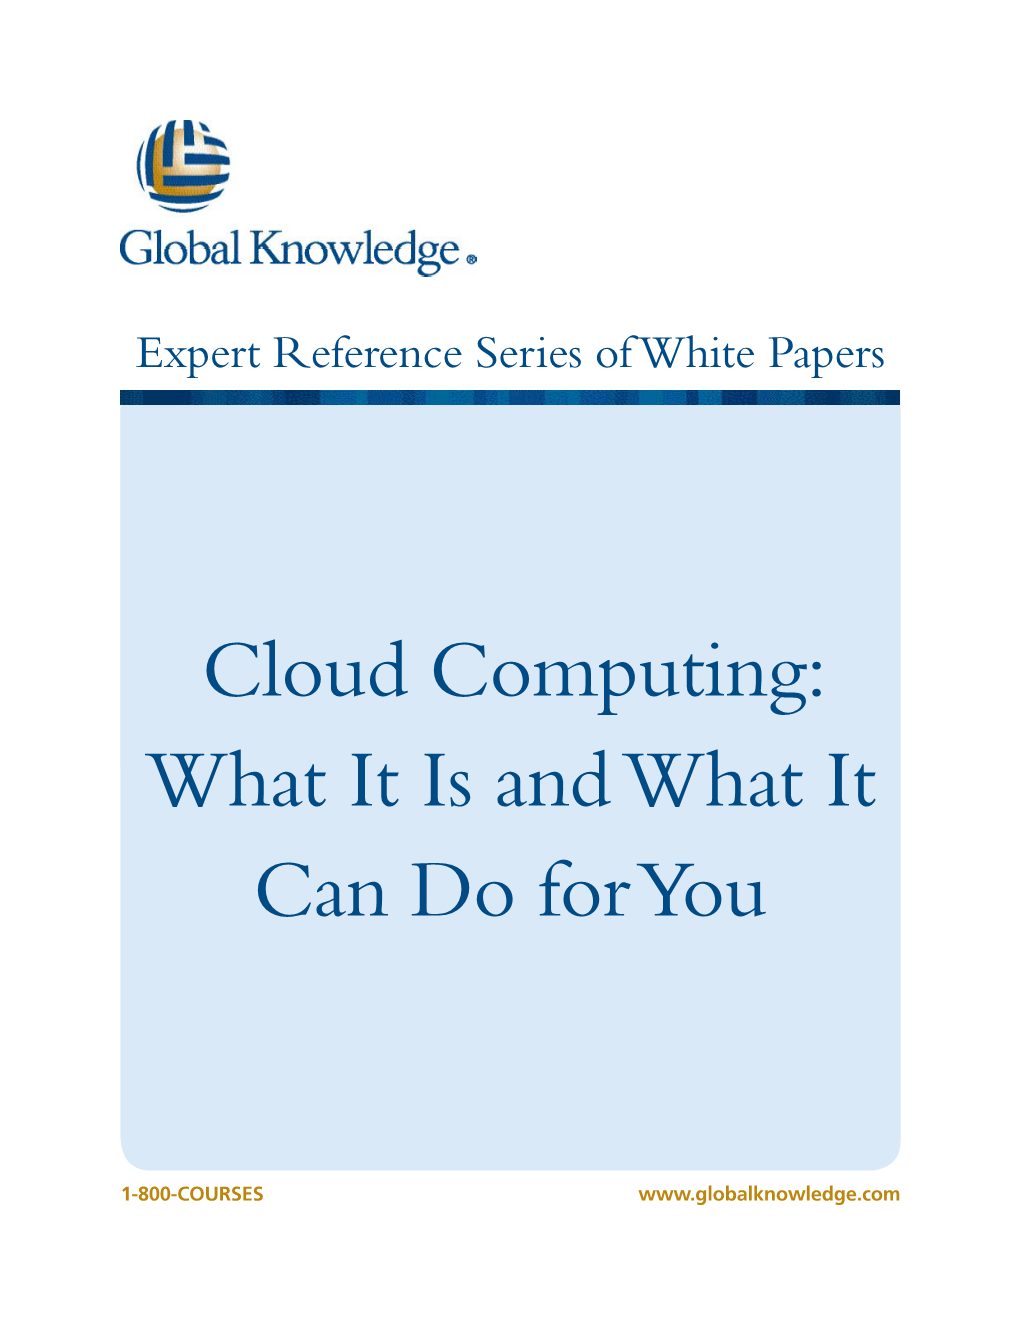 Cloud Computing: What It Is and What It Can Do for You